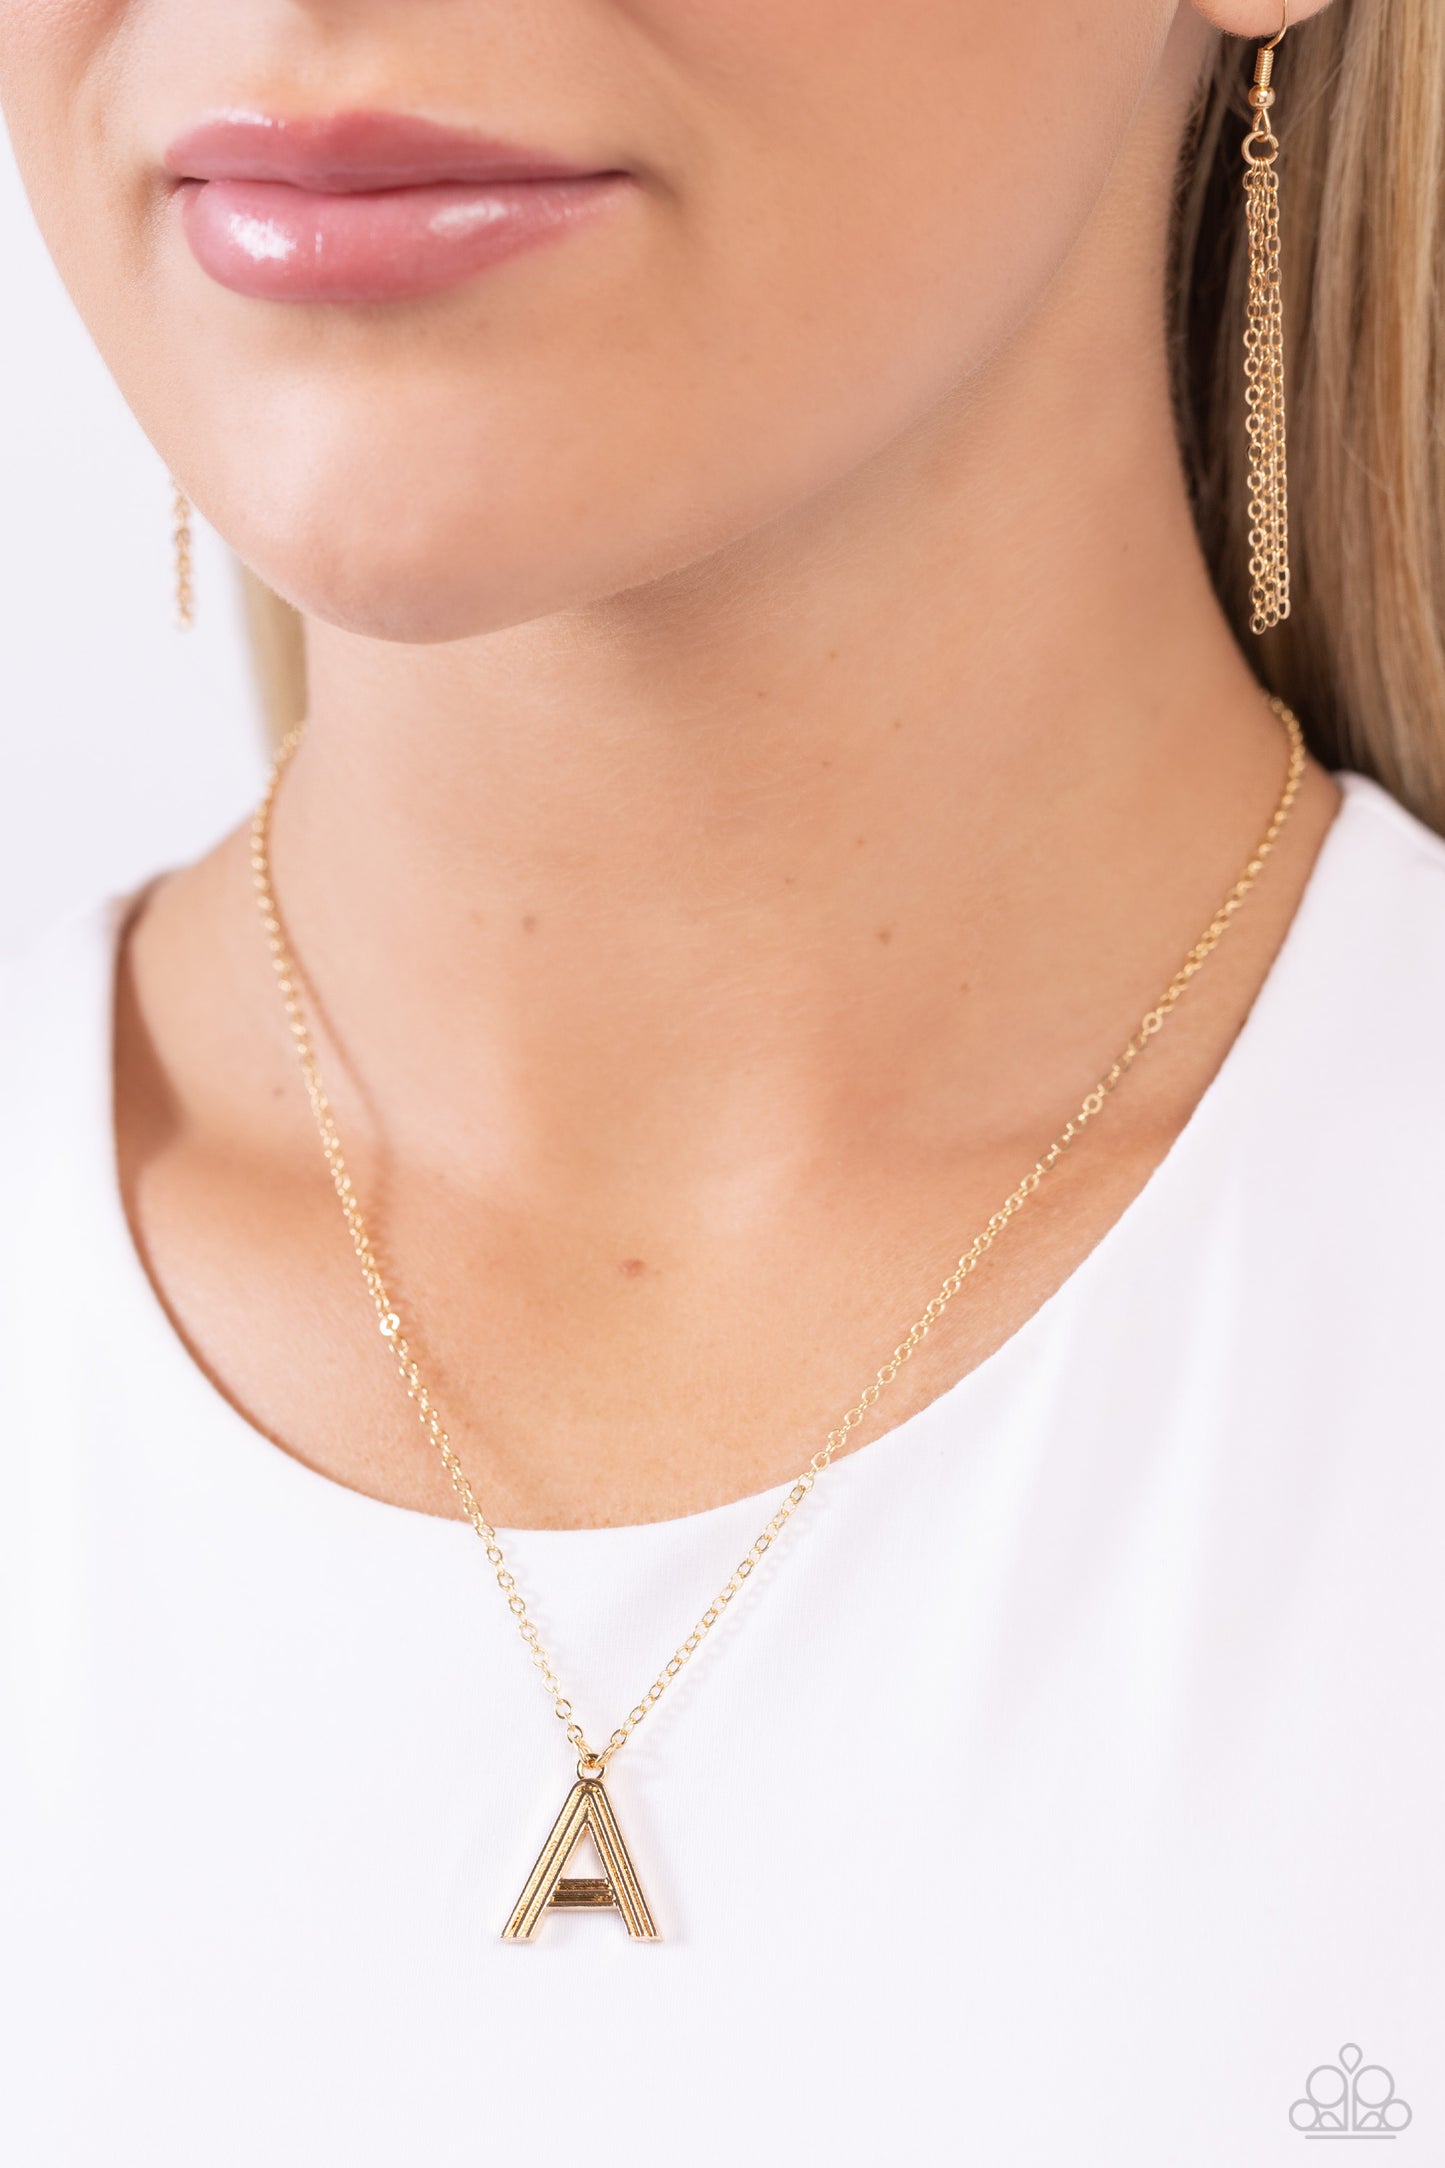 Leave Your Initials Gold *A* Necklace Paparazzi